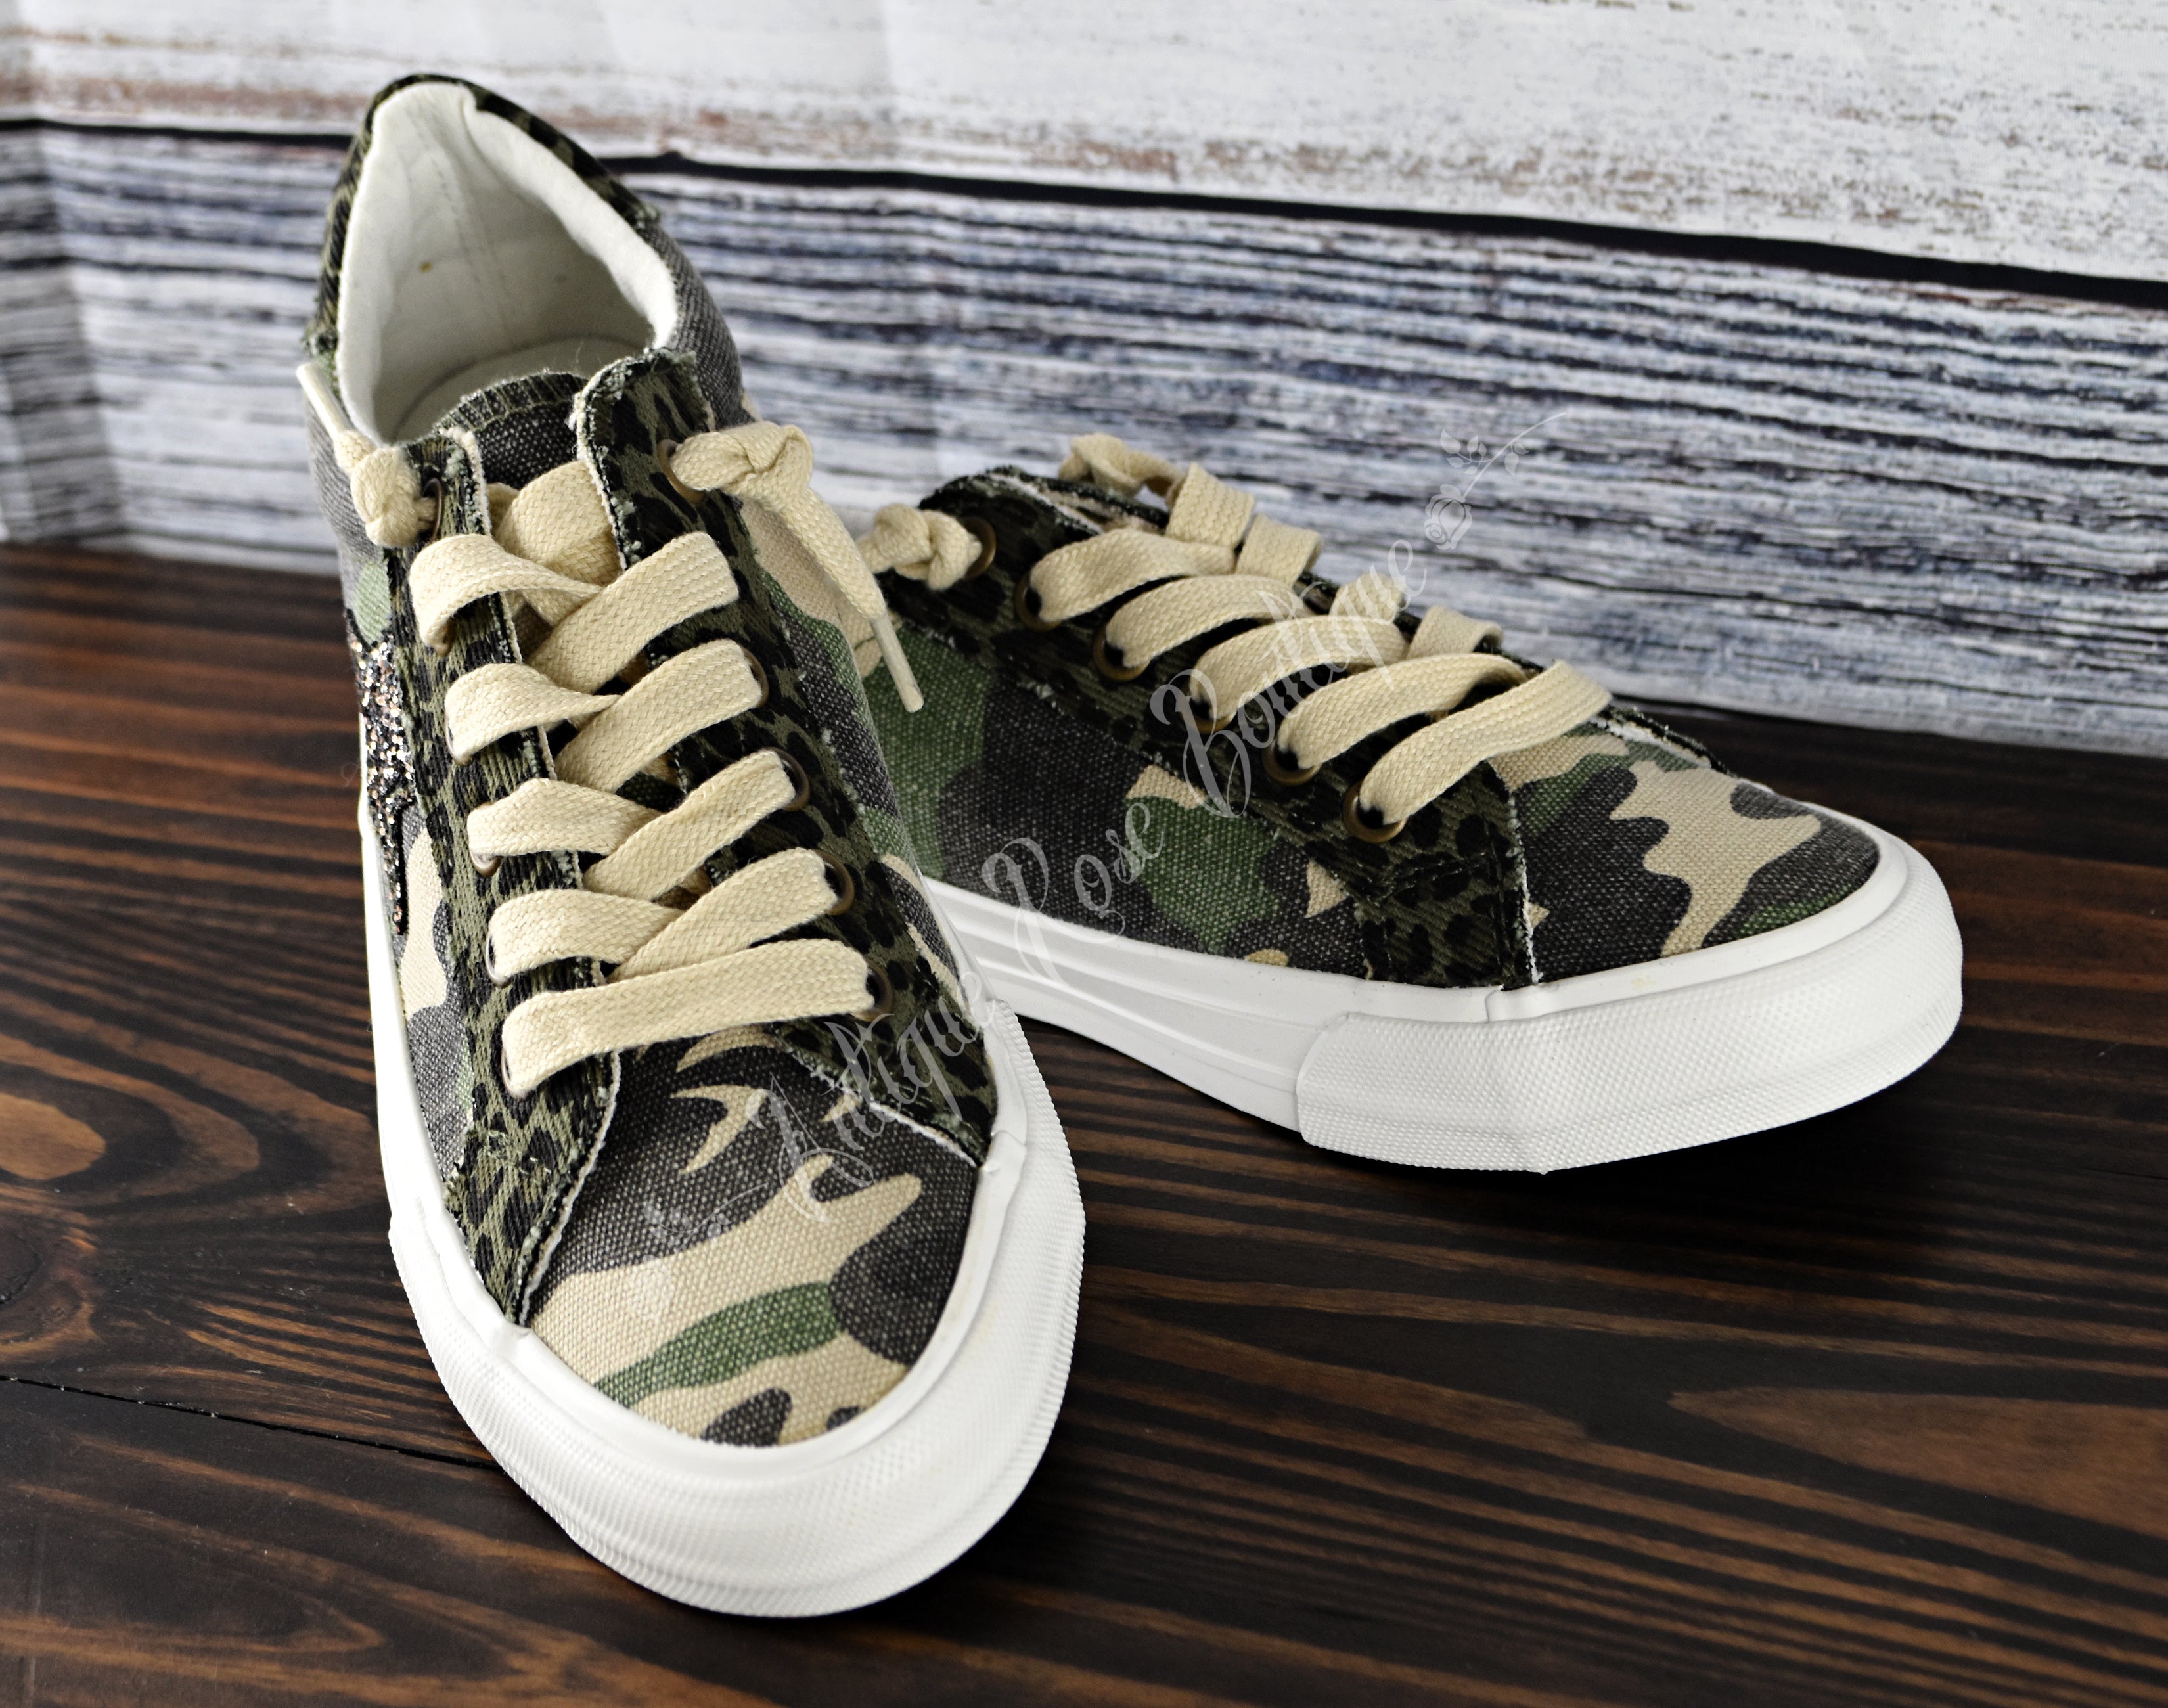 Shop CONVERSE ALL STAR Camouflage Unisex Street Style Tie-dye Sneakers  (31310320, 31310310) by Rbrand | BUYMA